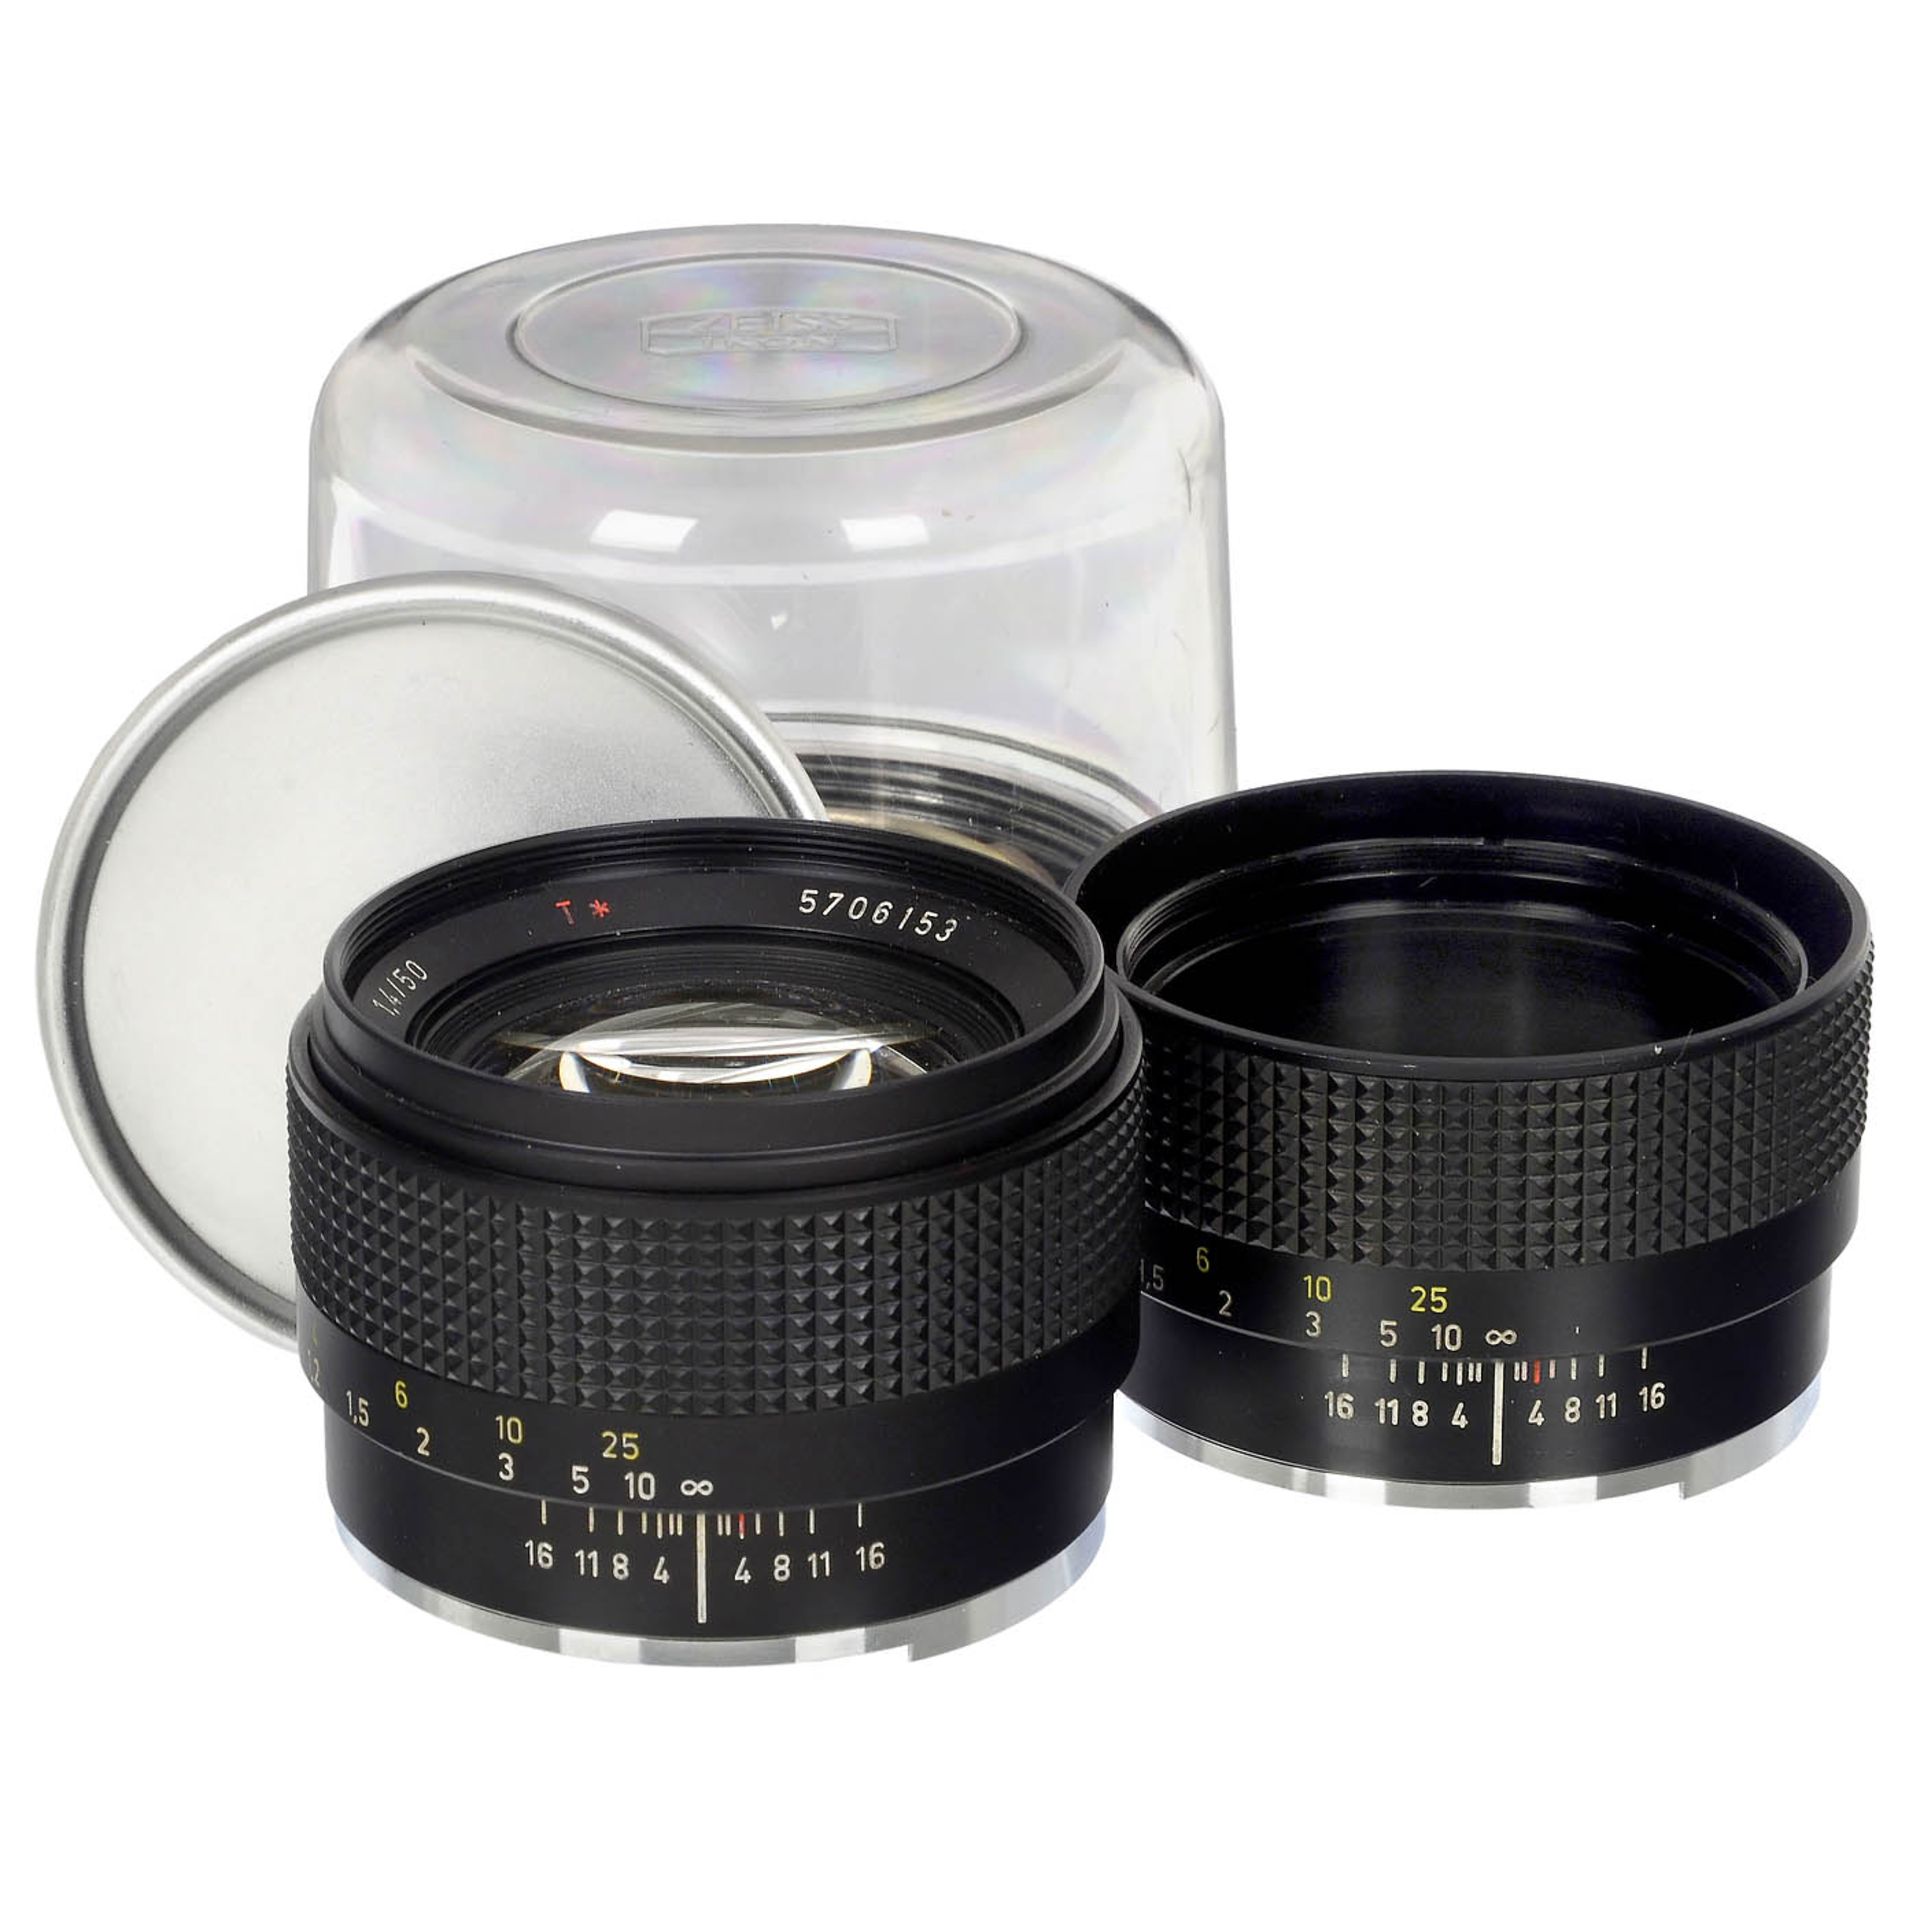 Planar 1.4/50 mm Lens for the Weber SL 75 (Planned Successor Model to Contarex)